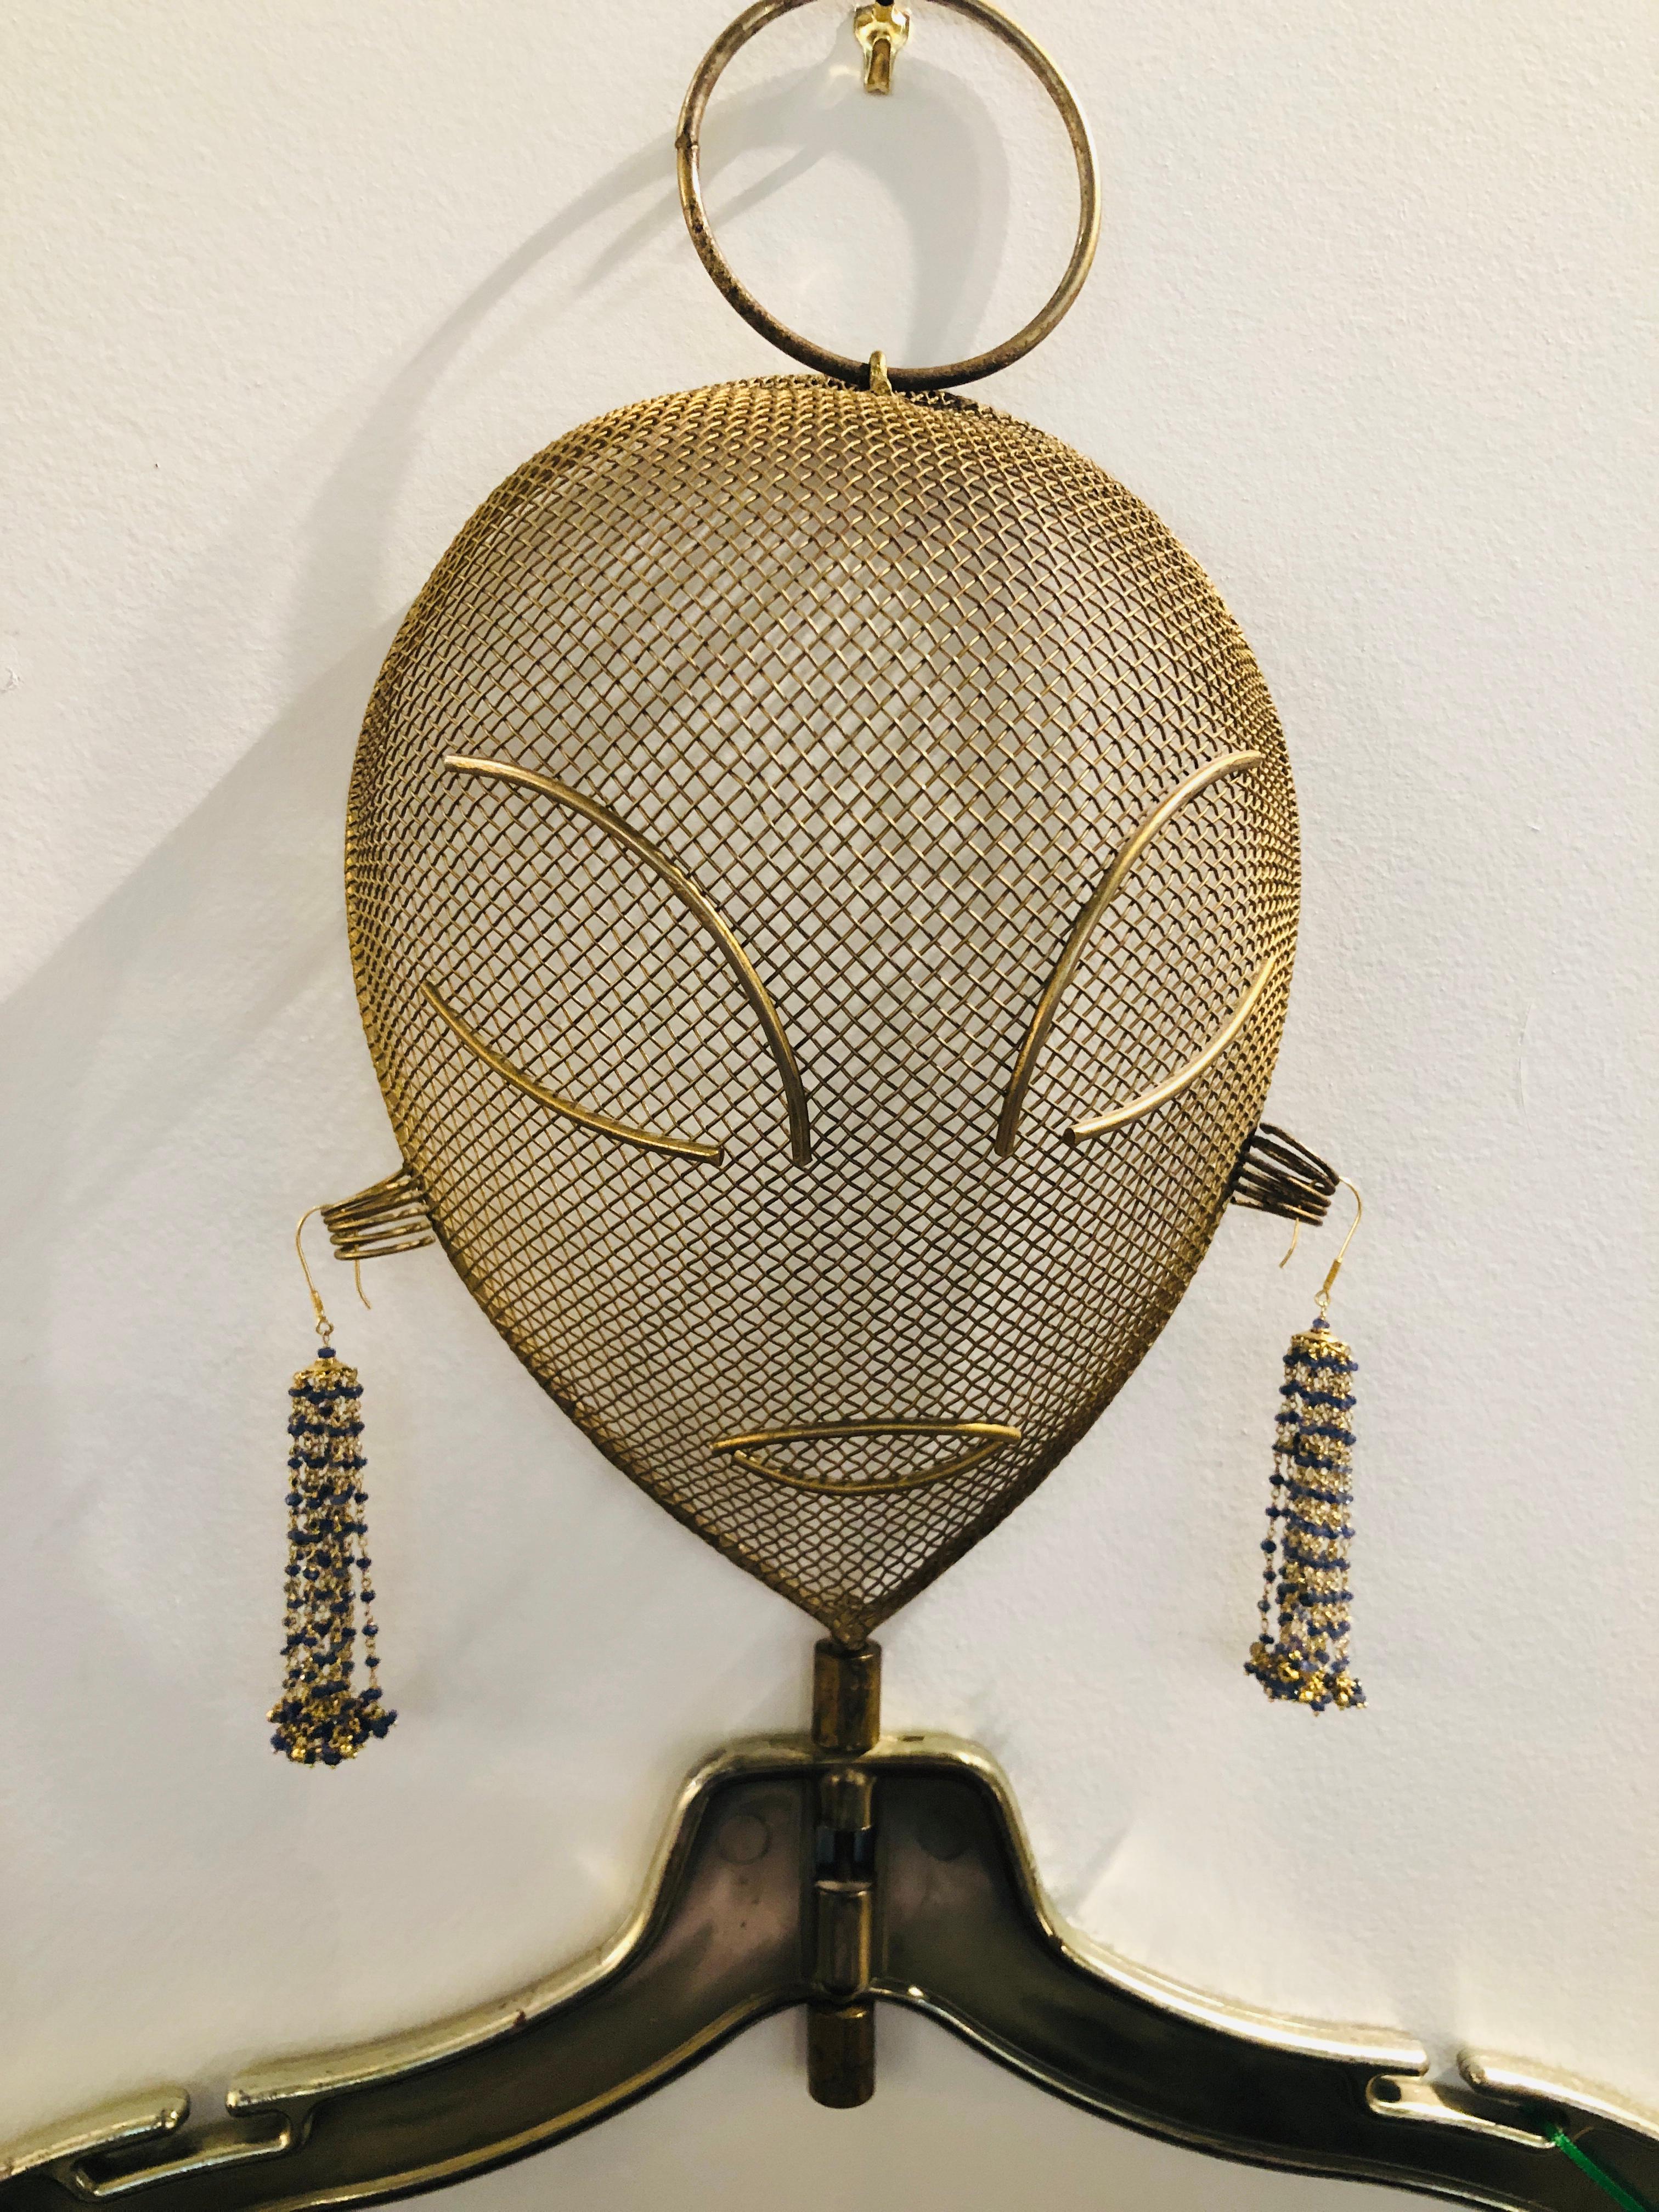 Offered is a Mid-Century Modern Frederic Weinberg bronze / gold painted metal mannequin head on hanger. The piece has a large metal loop that attaches to the crown of the head for hanging. This piece would look fabulous in a dressing room on a